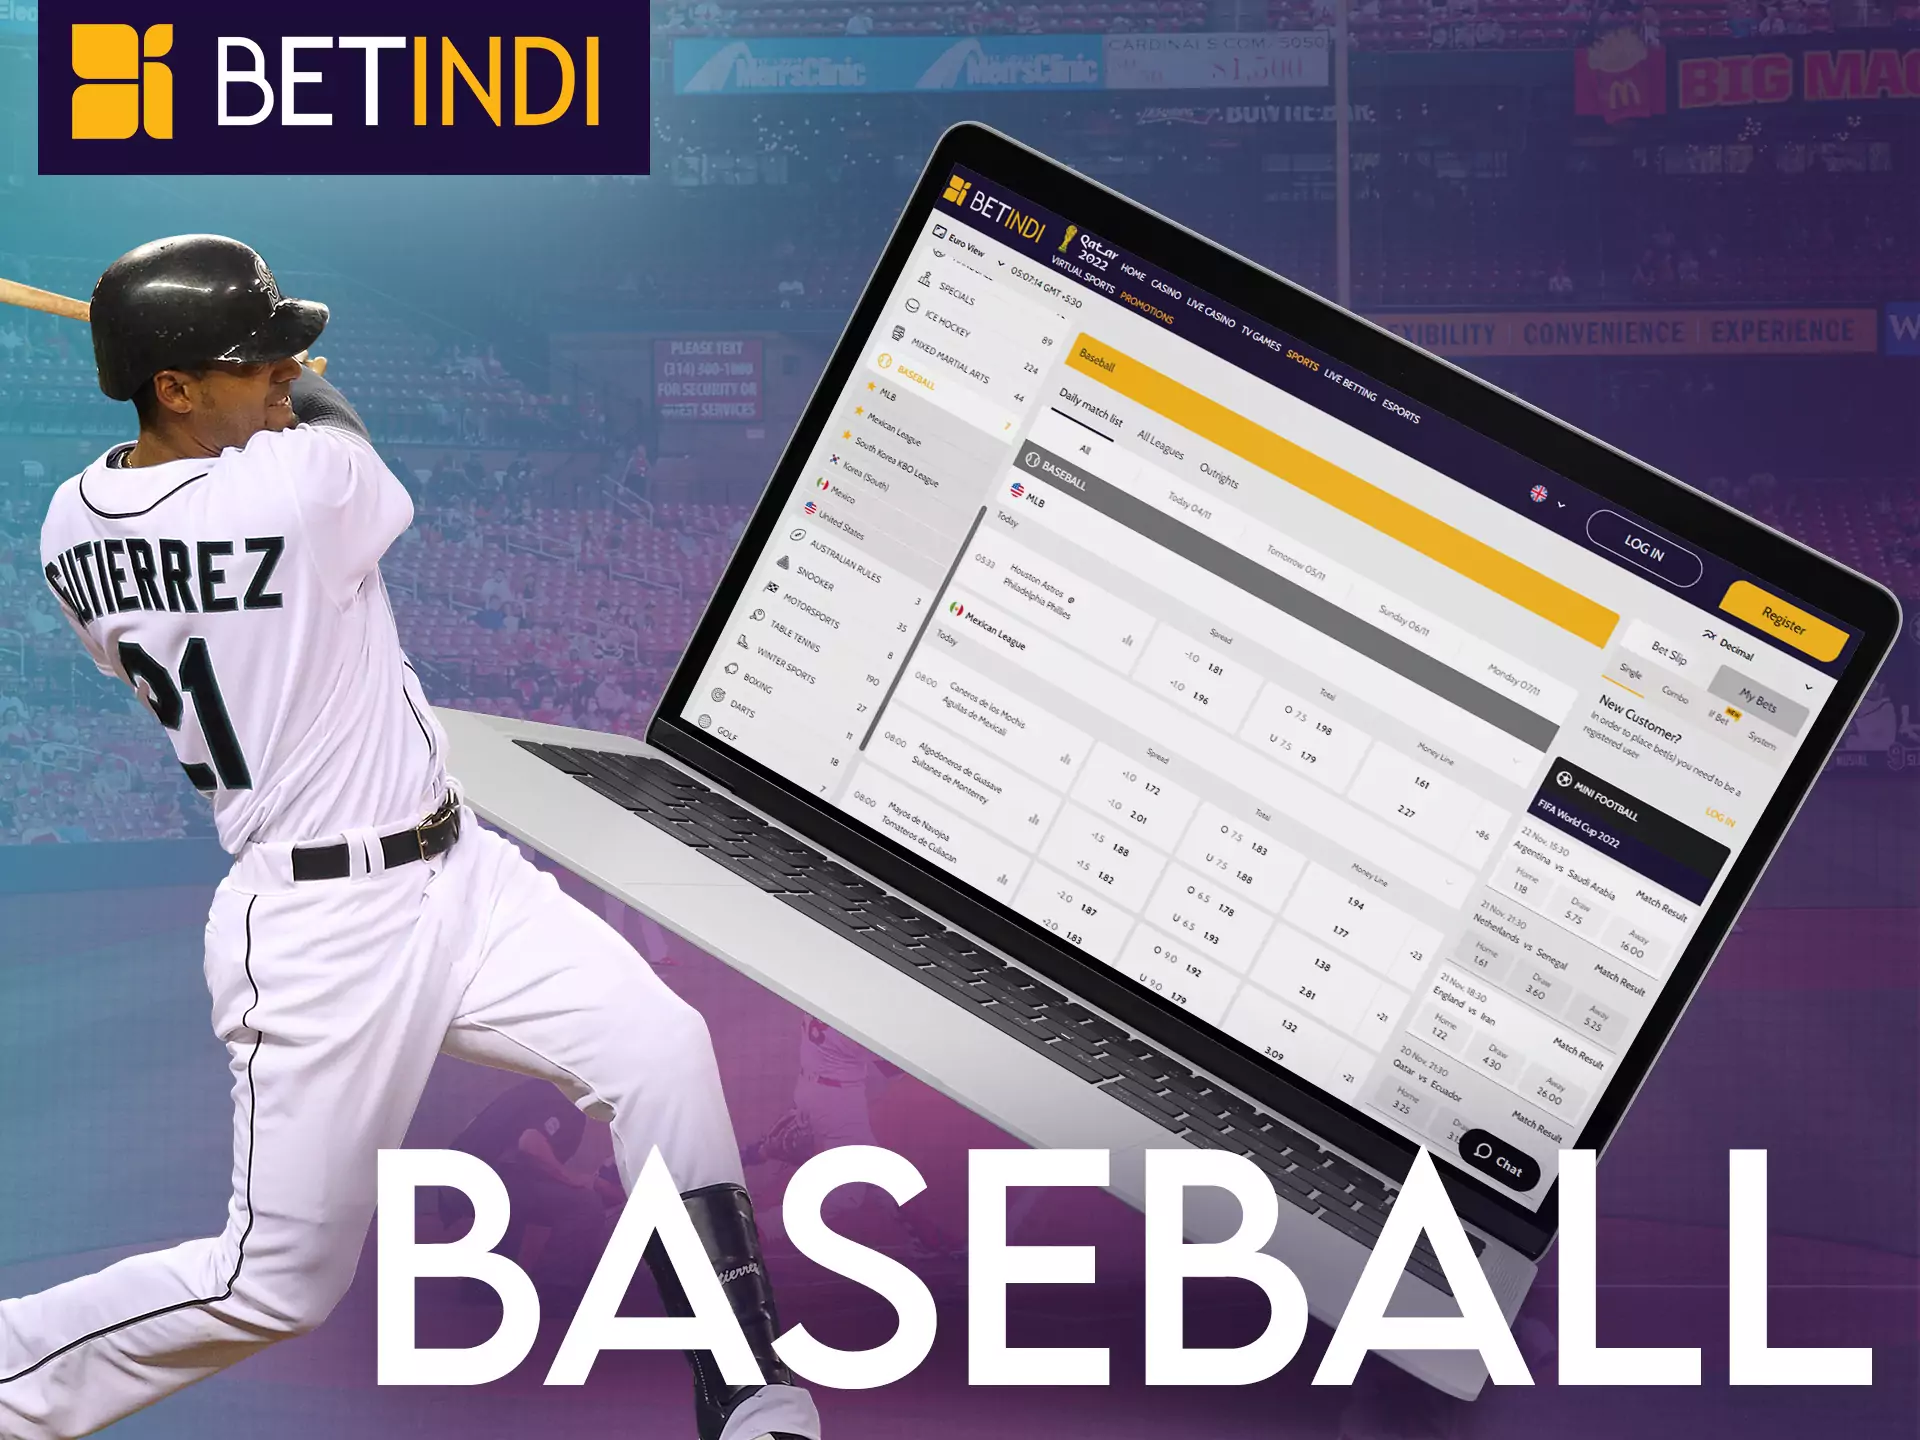 With Betindi, you can bet on your favorite baseball teams.